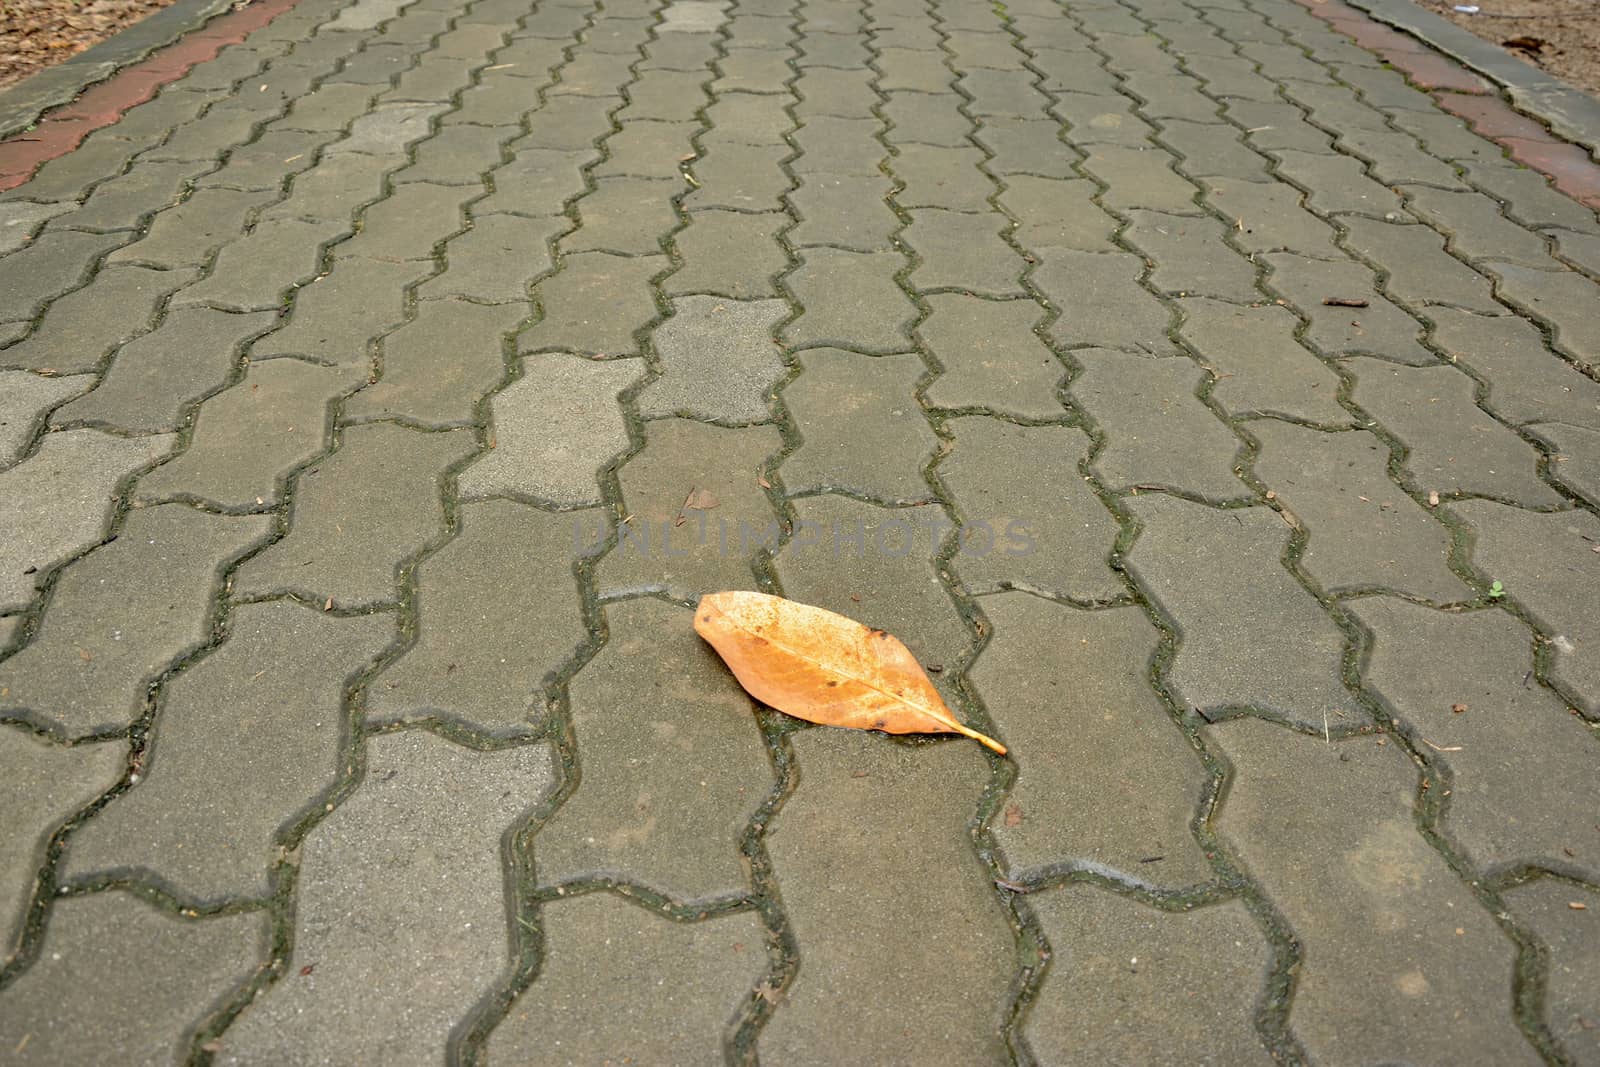 yellow fallen leaf on the road by think4photop